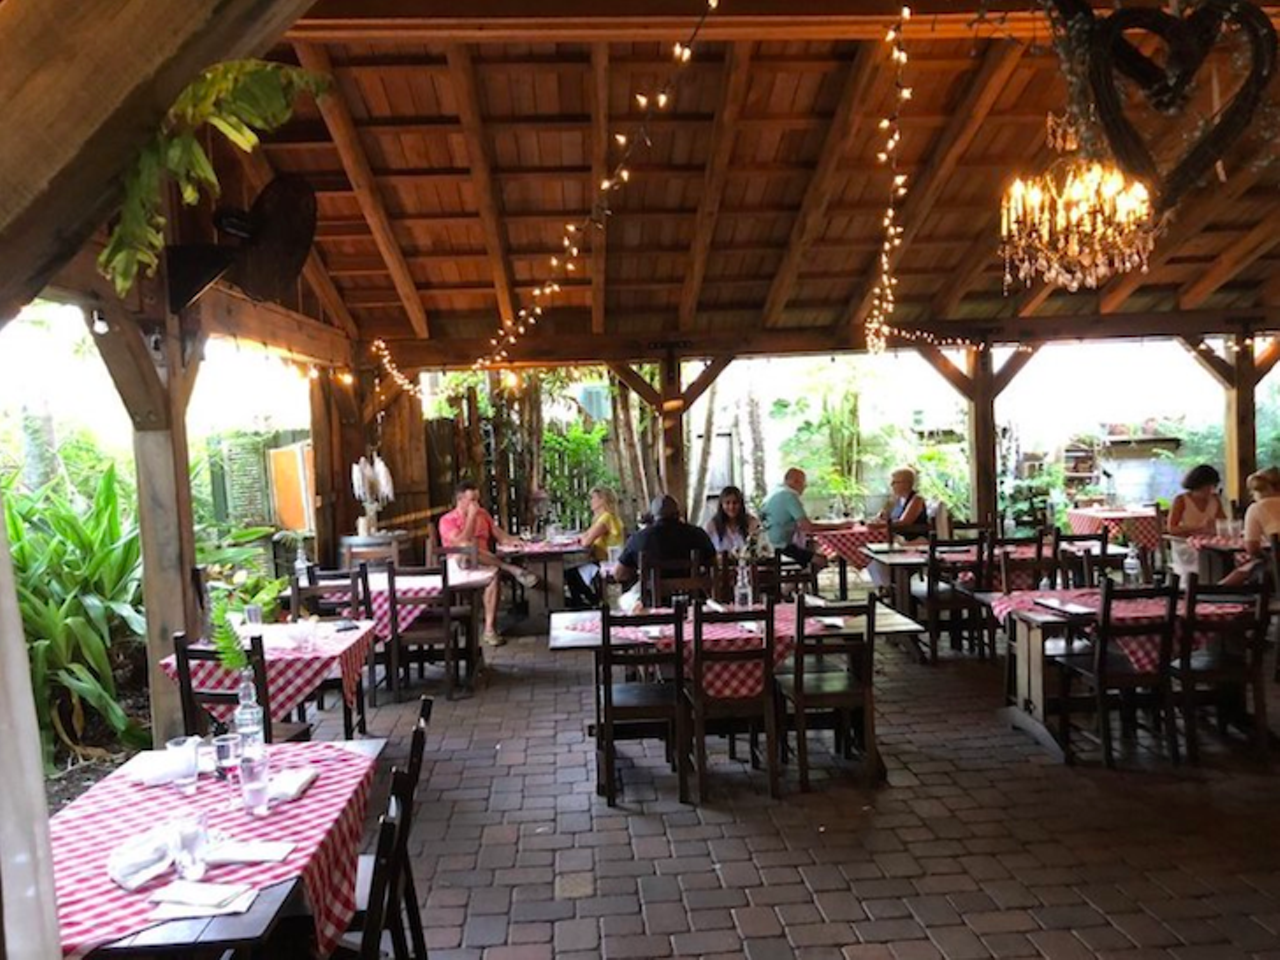 Pia&#146;s Trattoria
3054 Beach Blvd., Gulfport,(727) 327-2190
Visit Pia&#146;s Trattoria for some Italian dining under their cozy, romantic outdoor dining room. 
Photo via Anita S./Yelp